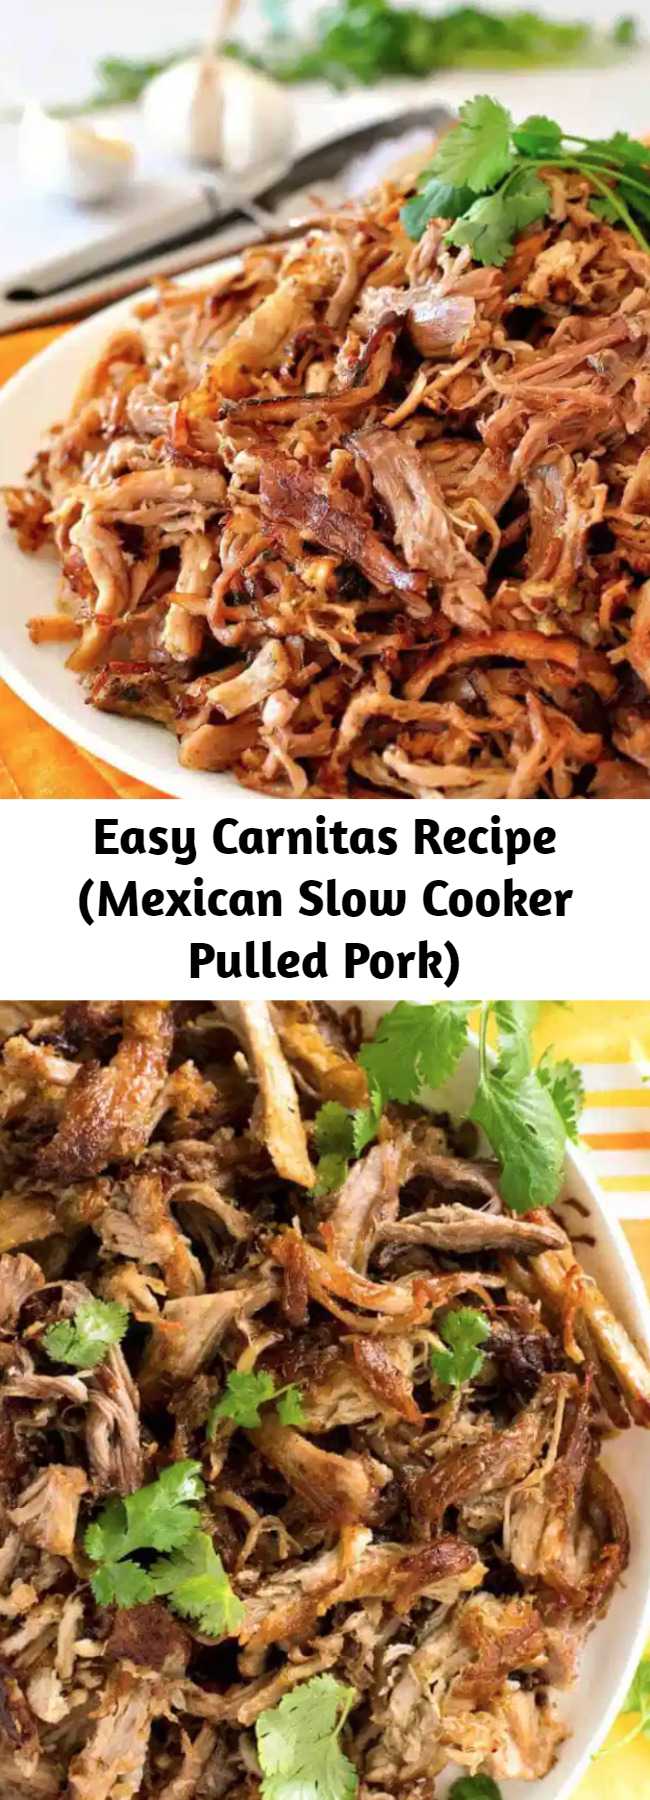 Easy Carnitas Recipe (Mexican Slow Cooker Pulled Pork) - Super easy slow cooker Pork Carnitas (Mexican Pulled Pork) and the BEST way to get the brown bits! Every tortilla dreams of being stuffed with Carnitas. The best of the best of Mexican food, seasoned pork is slow cooked until tender before gently teasing apart with forks and pan frying to golden, crispy perfection. #crockpot